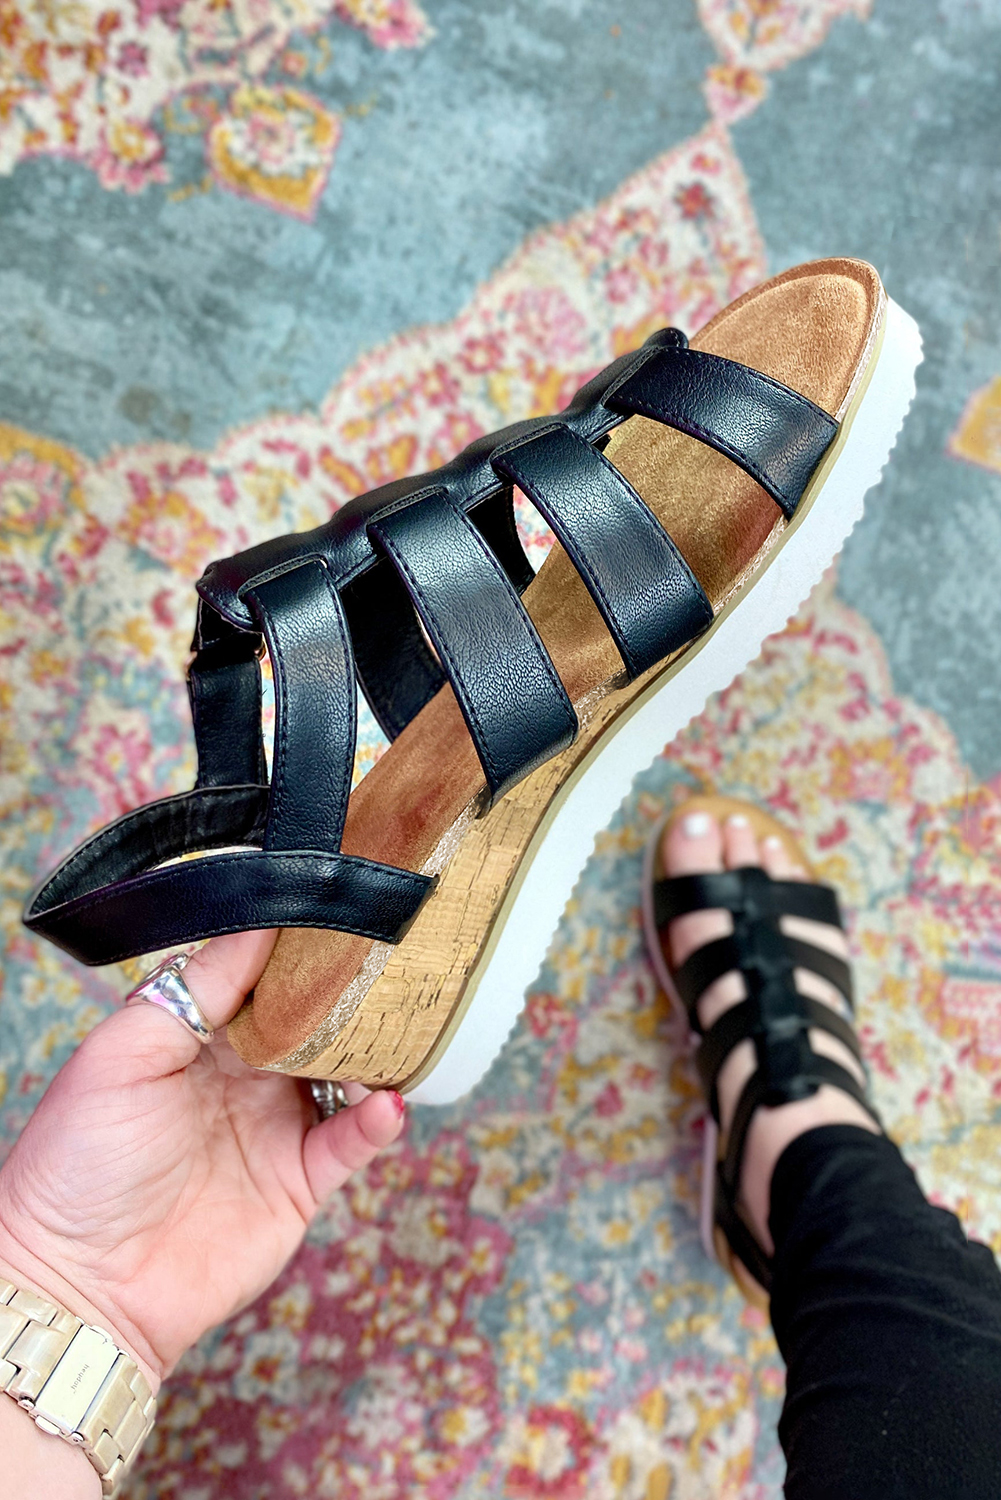 Black Hollowed PU Leather Straps Wedge SANDALS